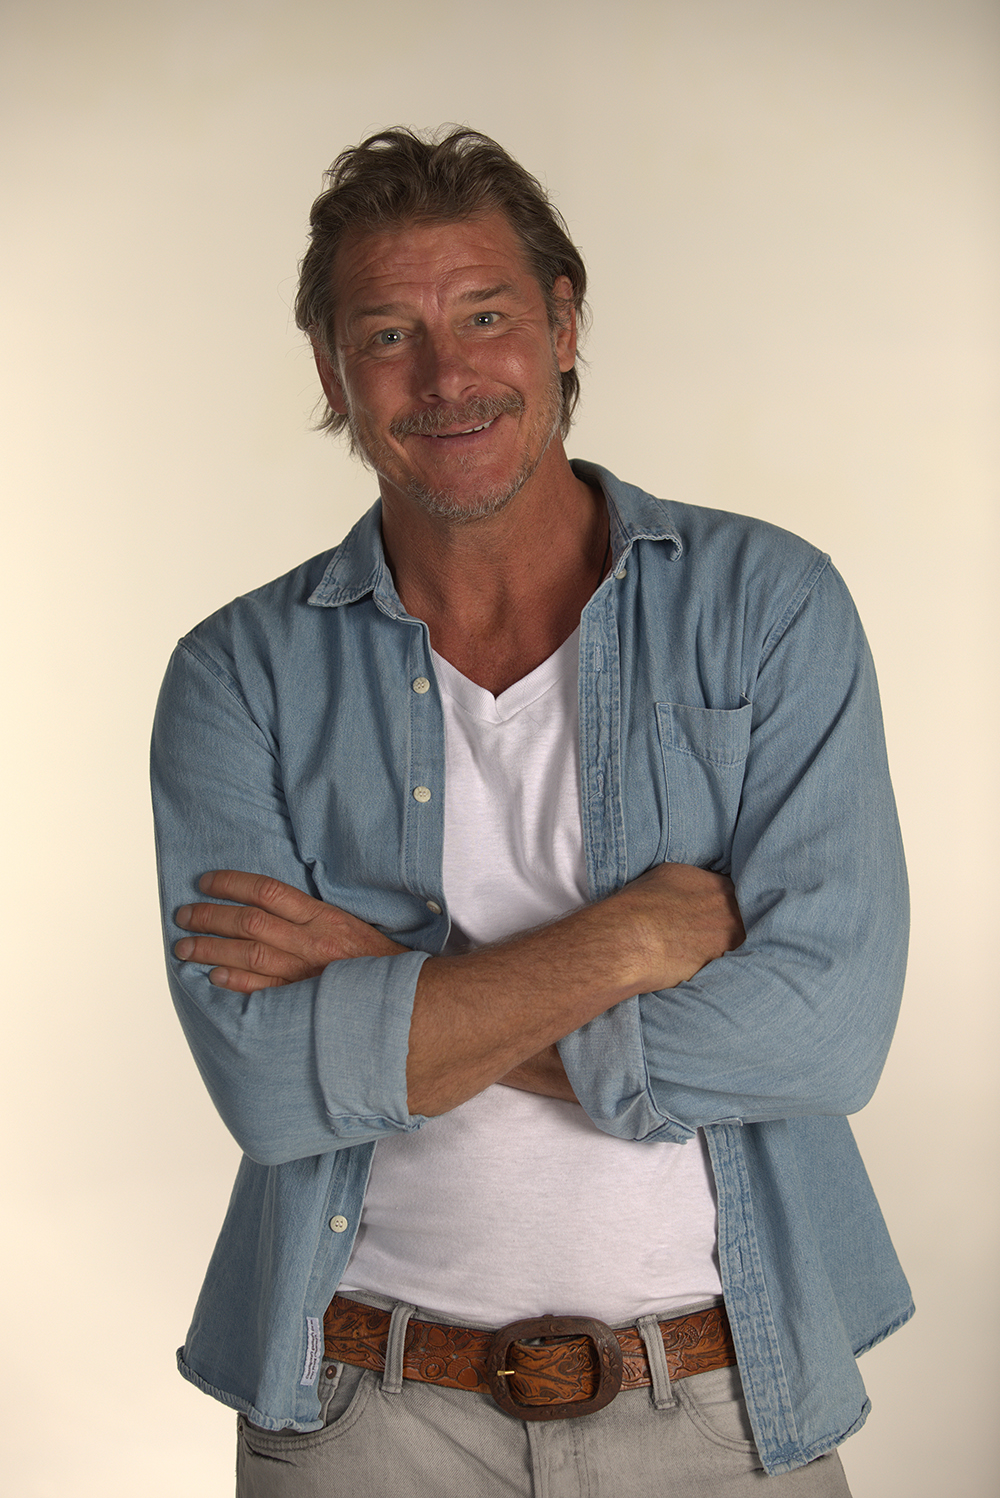 Extreme Makeover star Ty Pennington joins forces with popular social ...